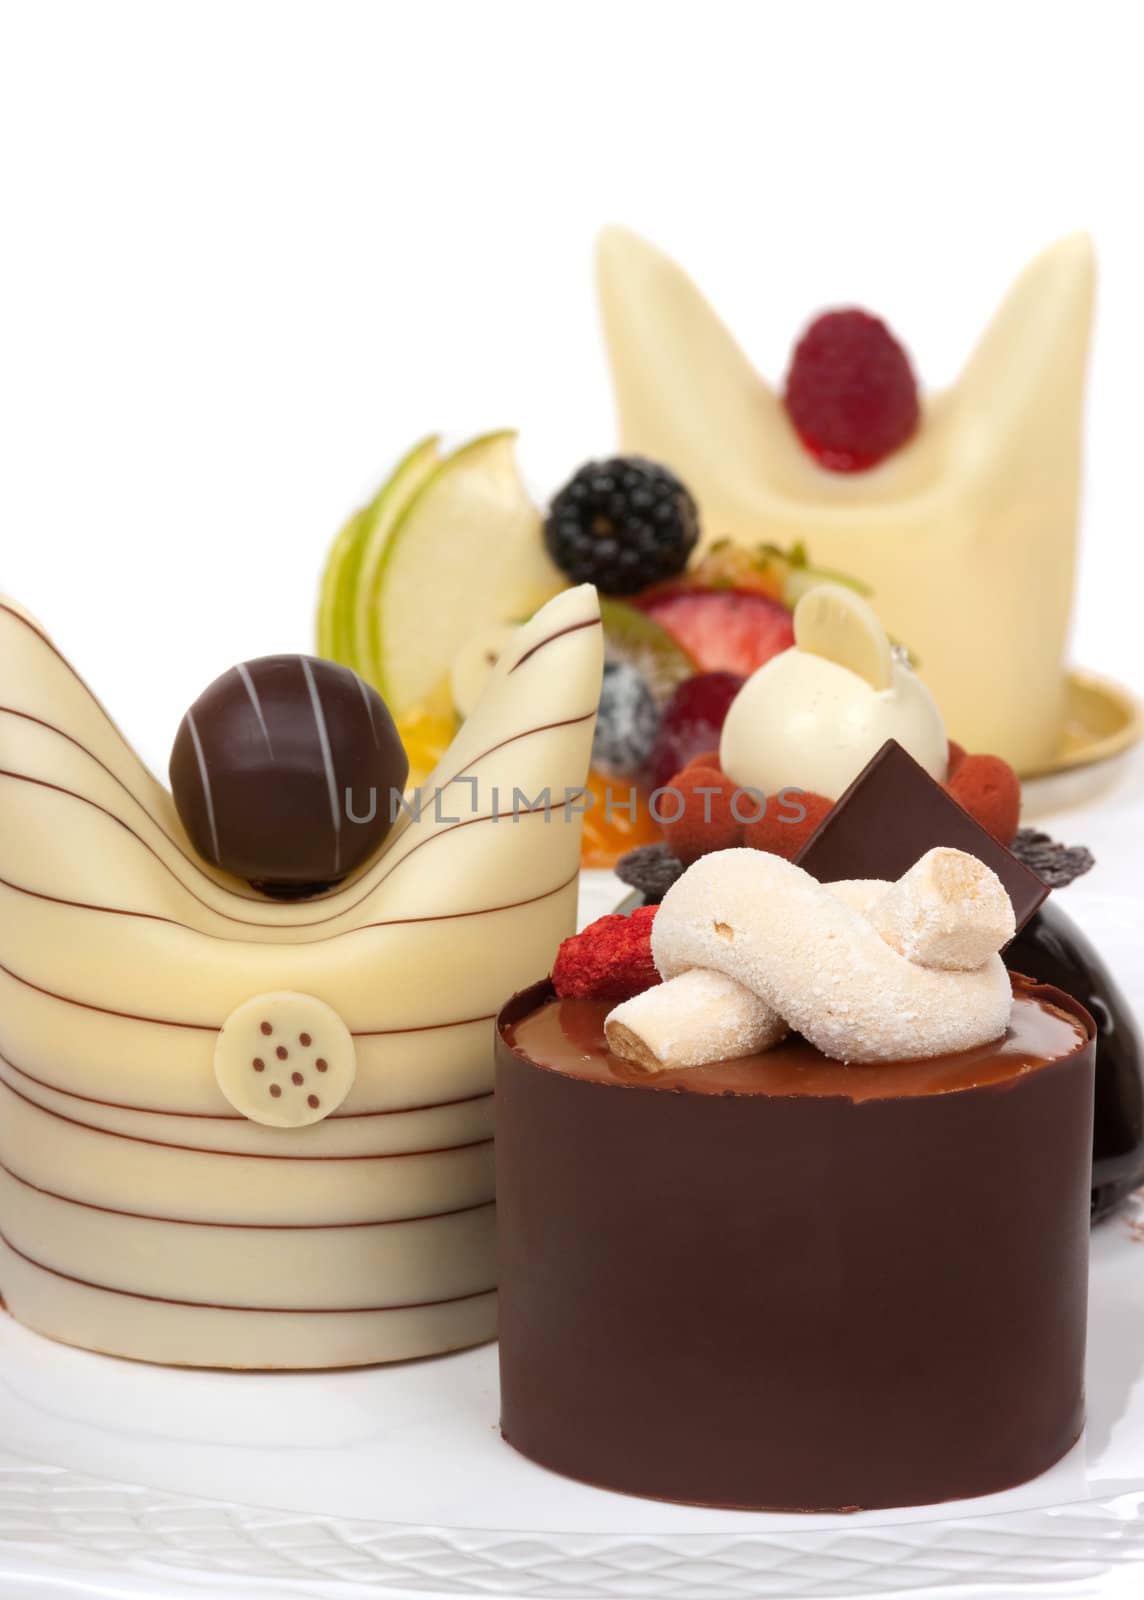 Gourmet French desserts with chocolate and fruit